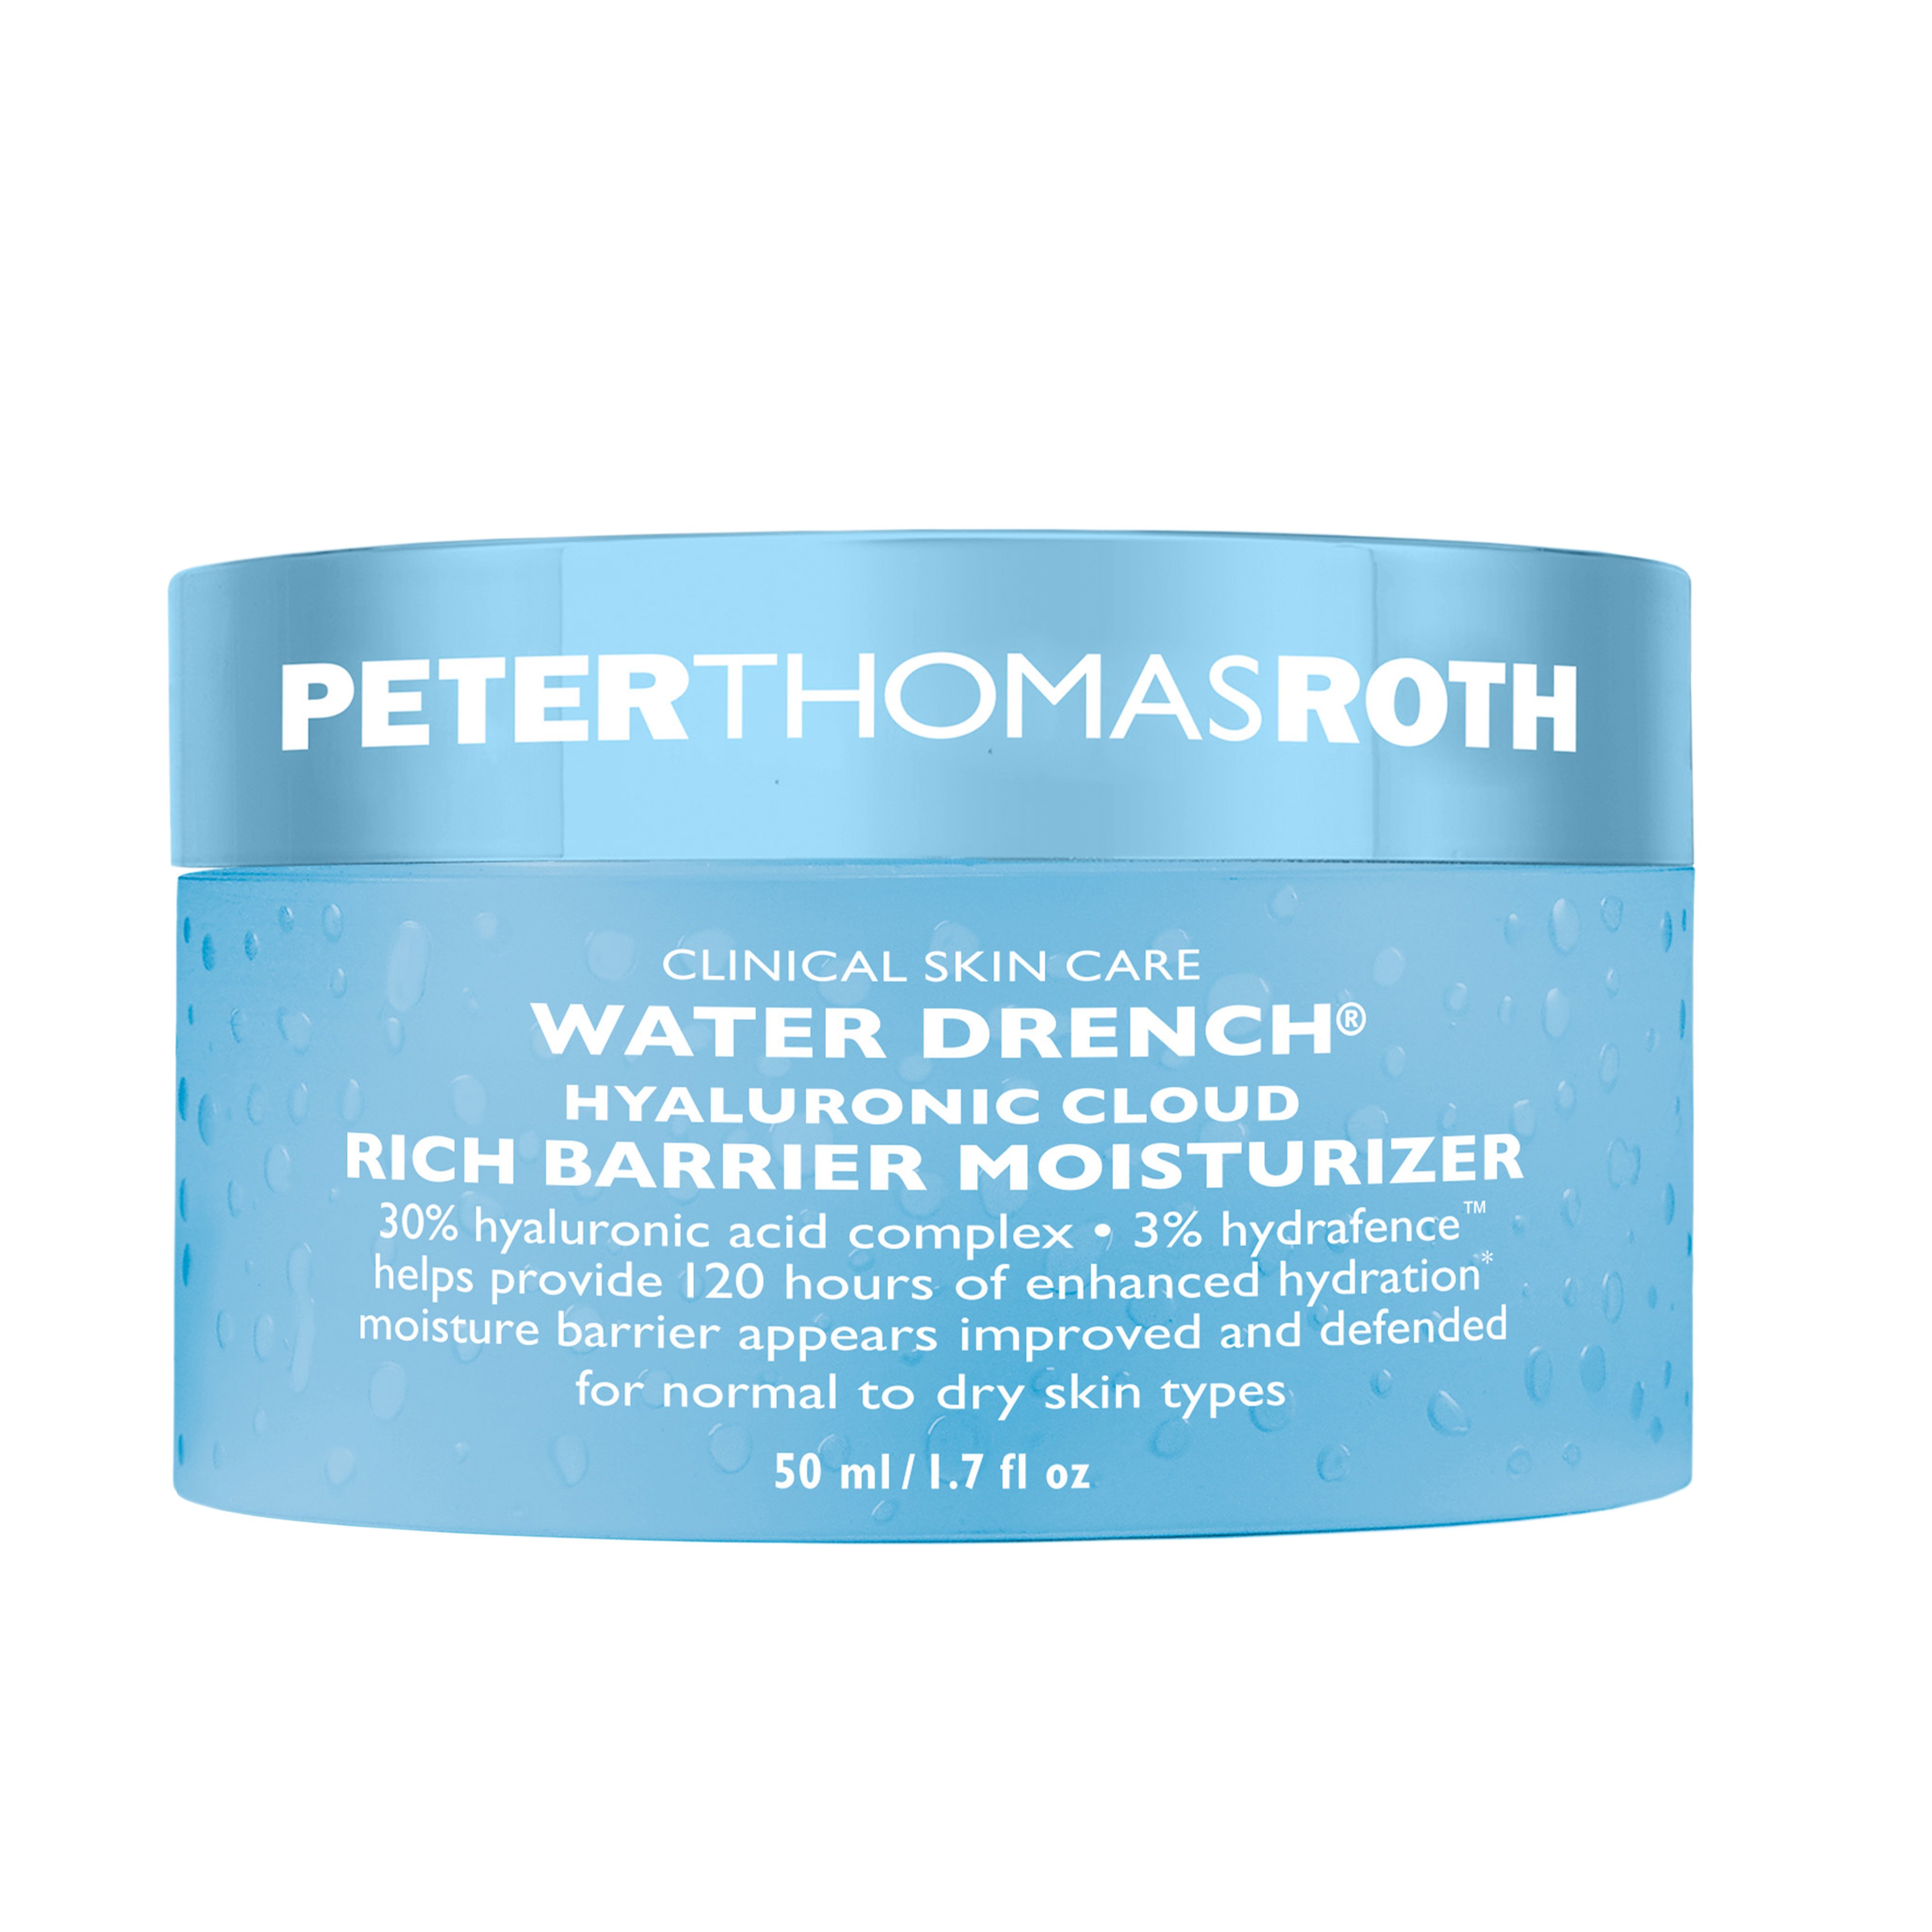 Peter Thomas Roth - Water Drench® Hyaluronic Cloud Rich Barrier Moisturizer 50 ml